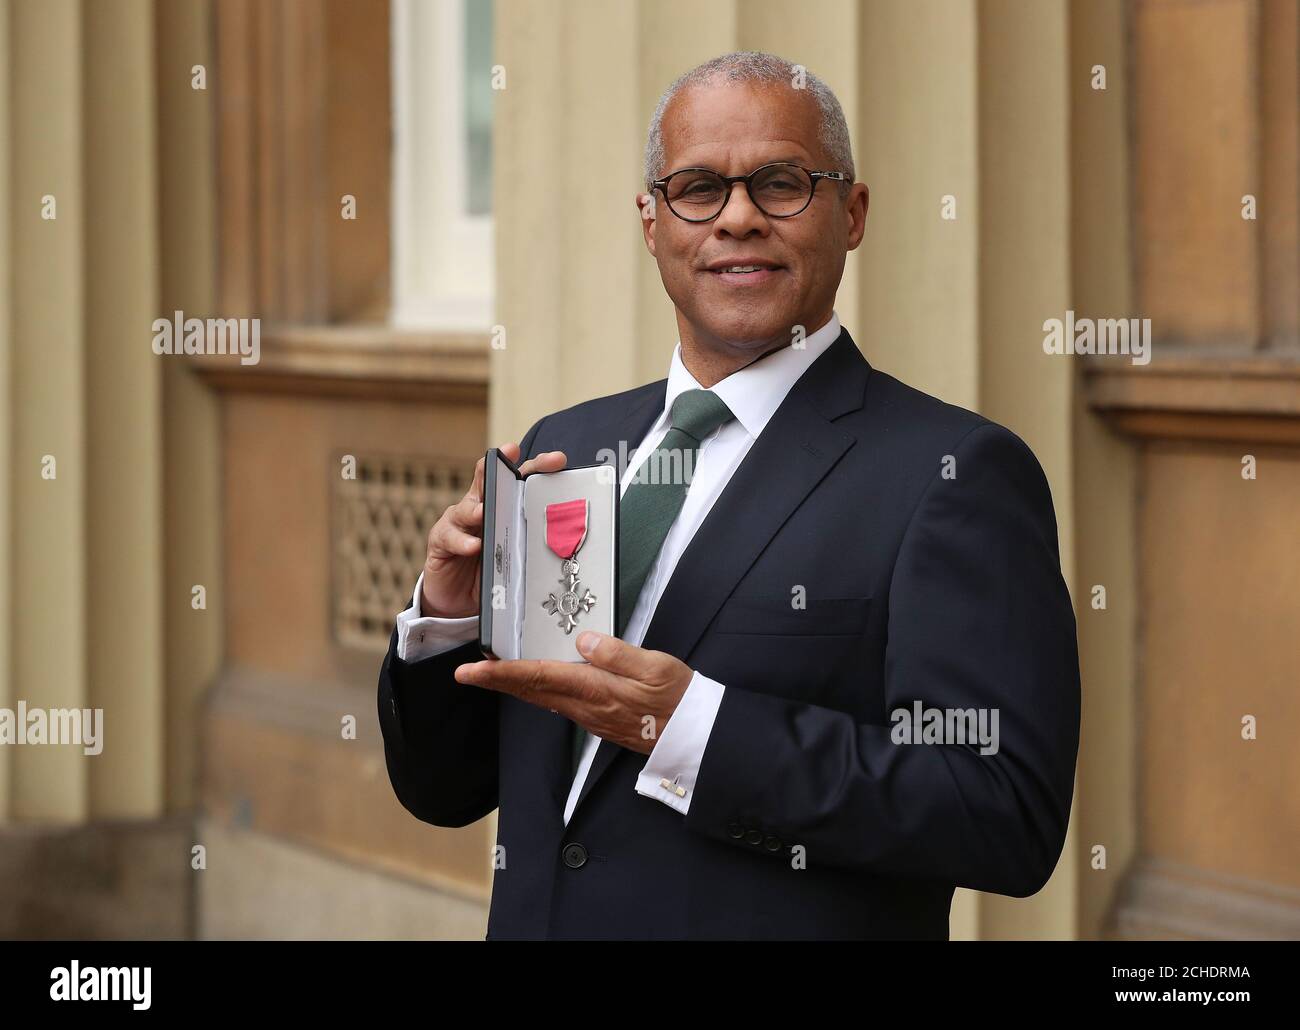 Gary Wilmot with his MBE (Member of the Order of the British Empire), which was presented at an investiture ceremony at Buckingham Palace, London. Stock Photo